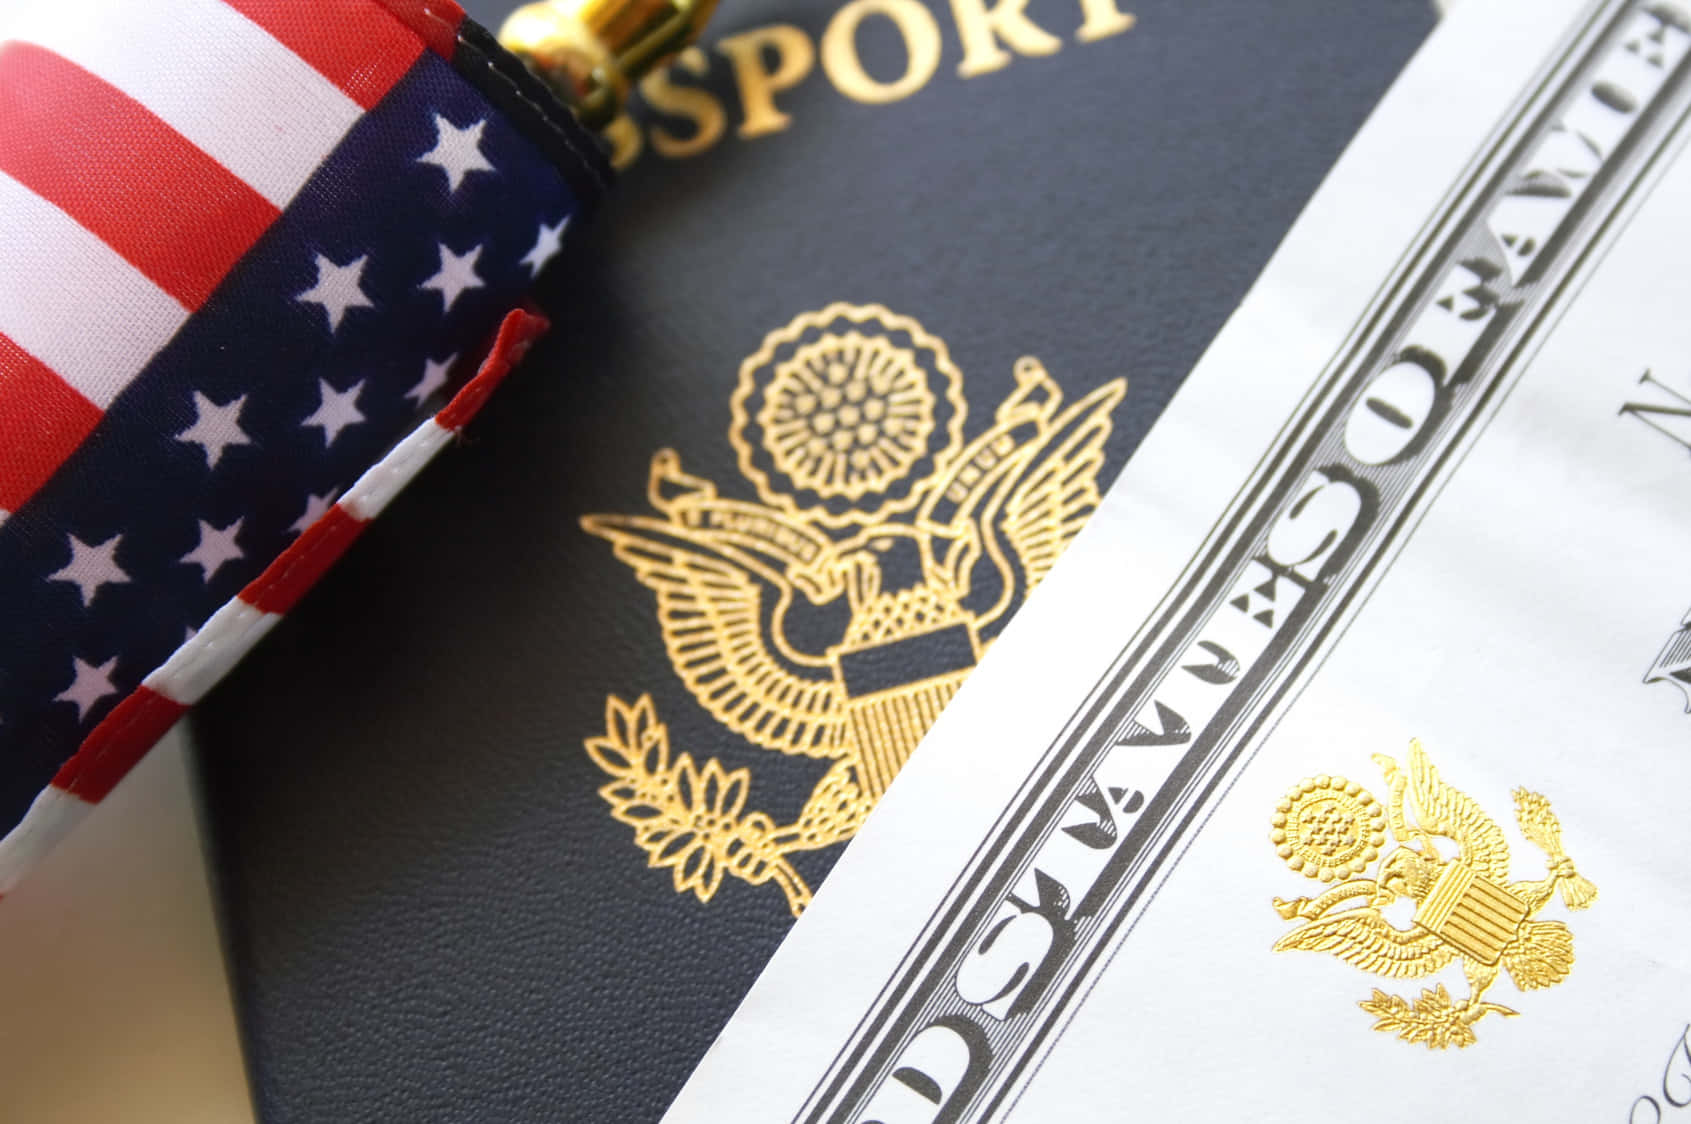 A Passport And An American Flag On Top Of A Table